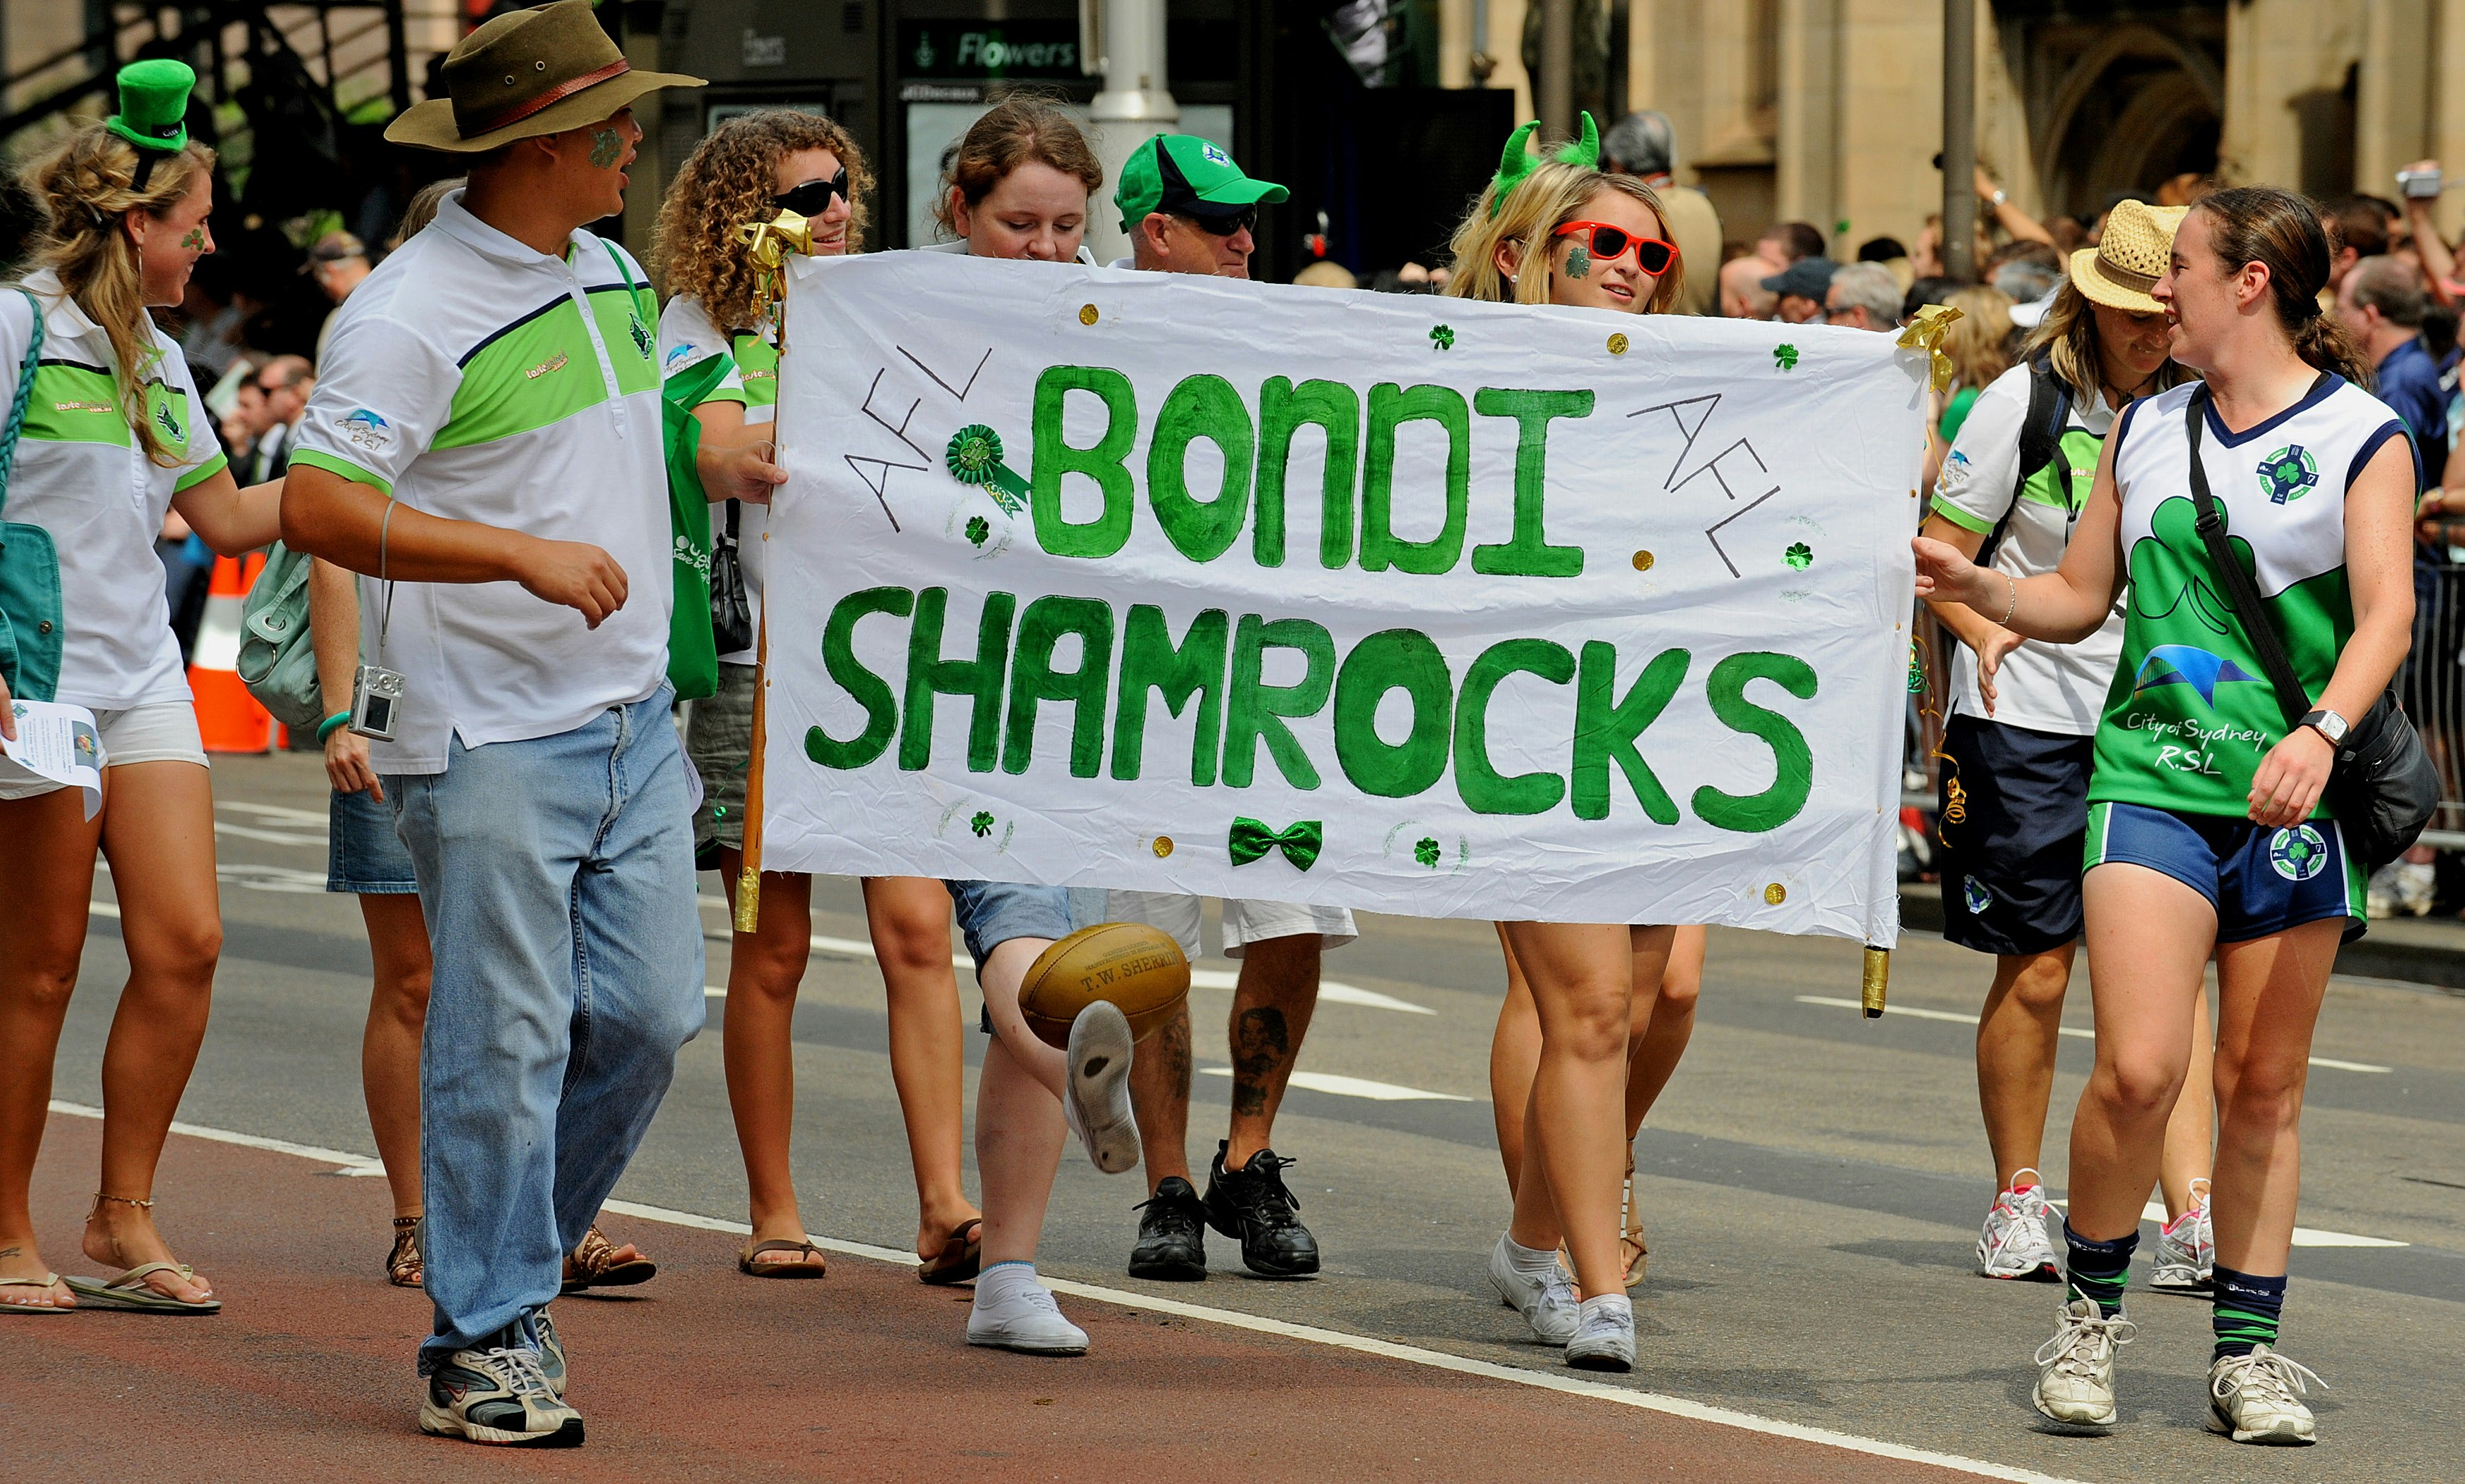 People in shorts and T-shirts hold up a banner saying 'Bondi Shamrocks' in a St Patrick's Day parade